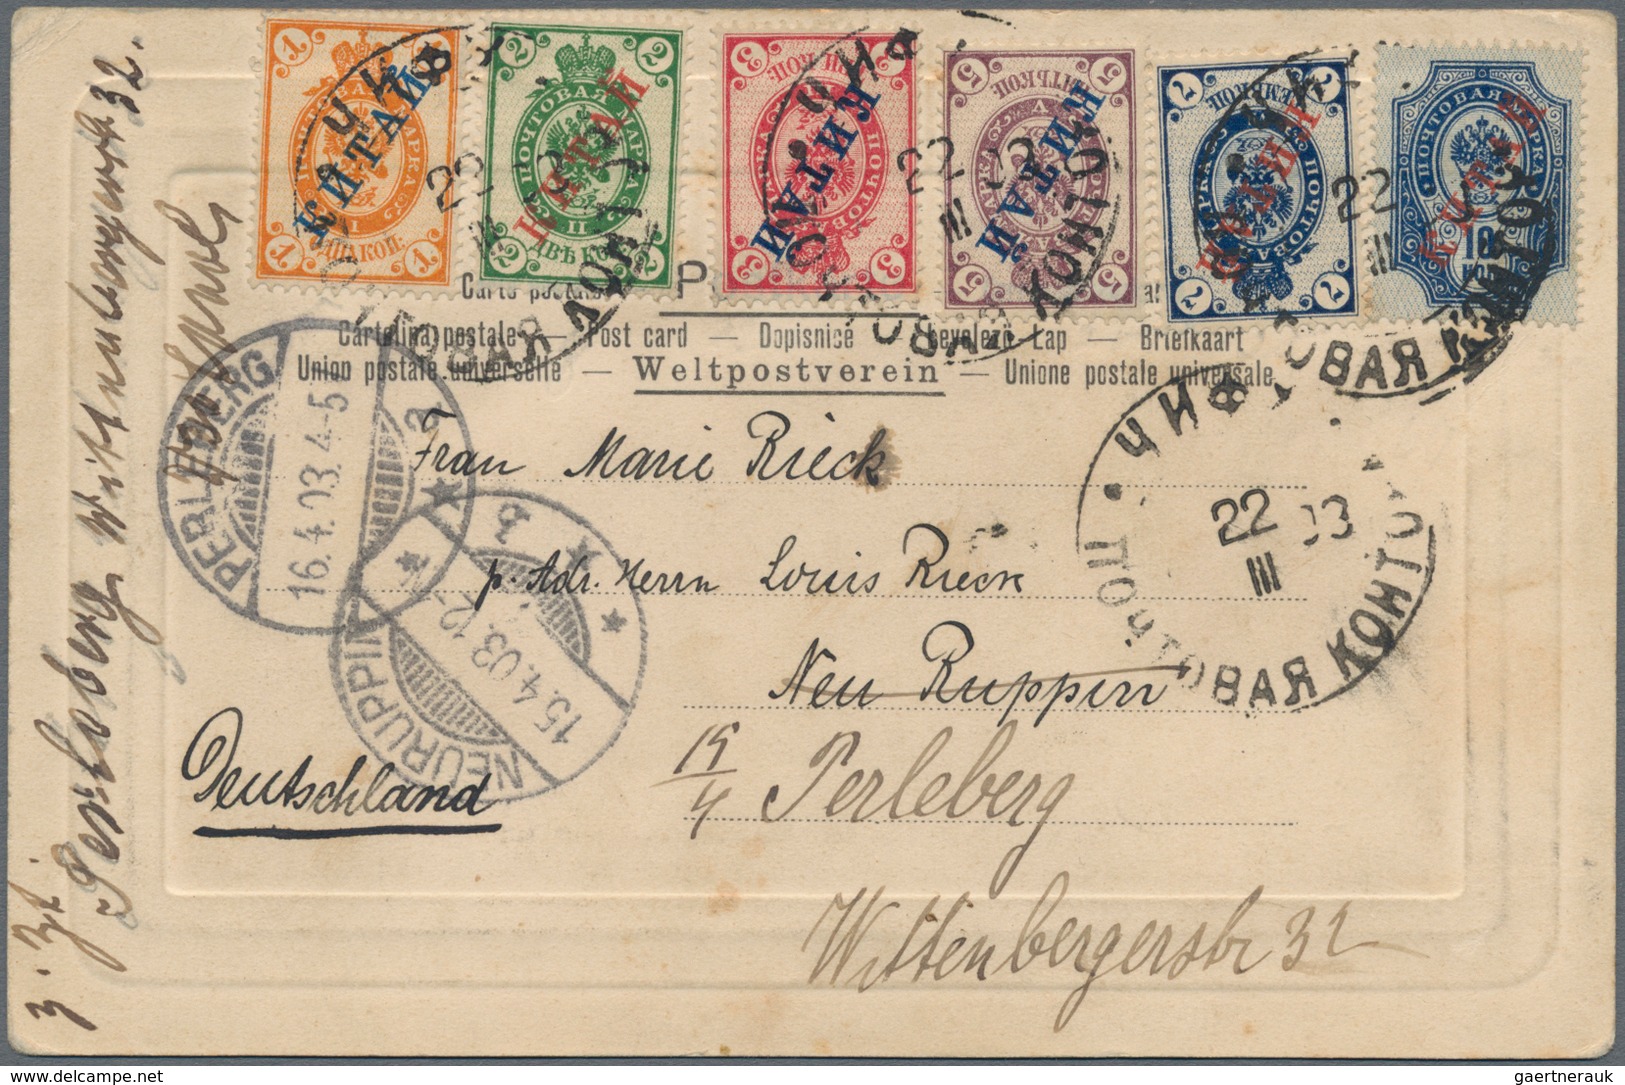 Russische Post In China: 1898, 1 K., 2 K., 3 K., 5 K. 7 K. And 10 K. Tied "INKOU 22 III (19)03" To P - China